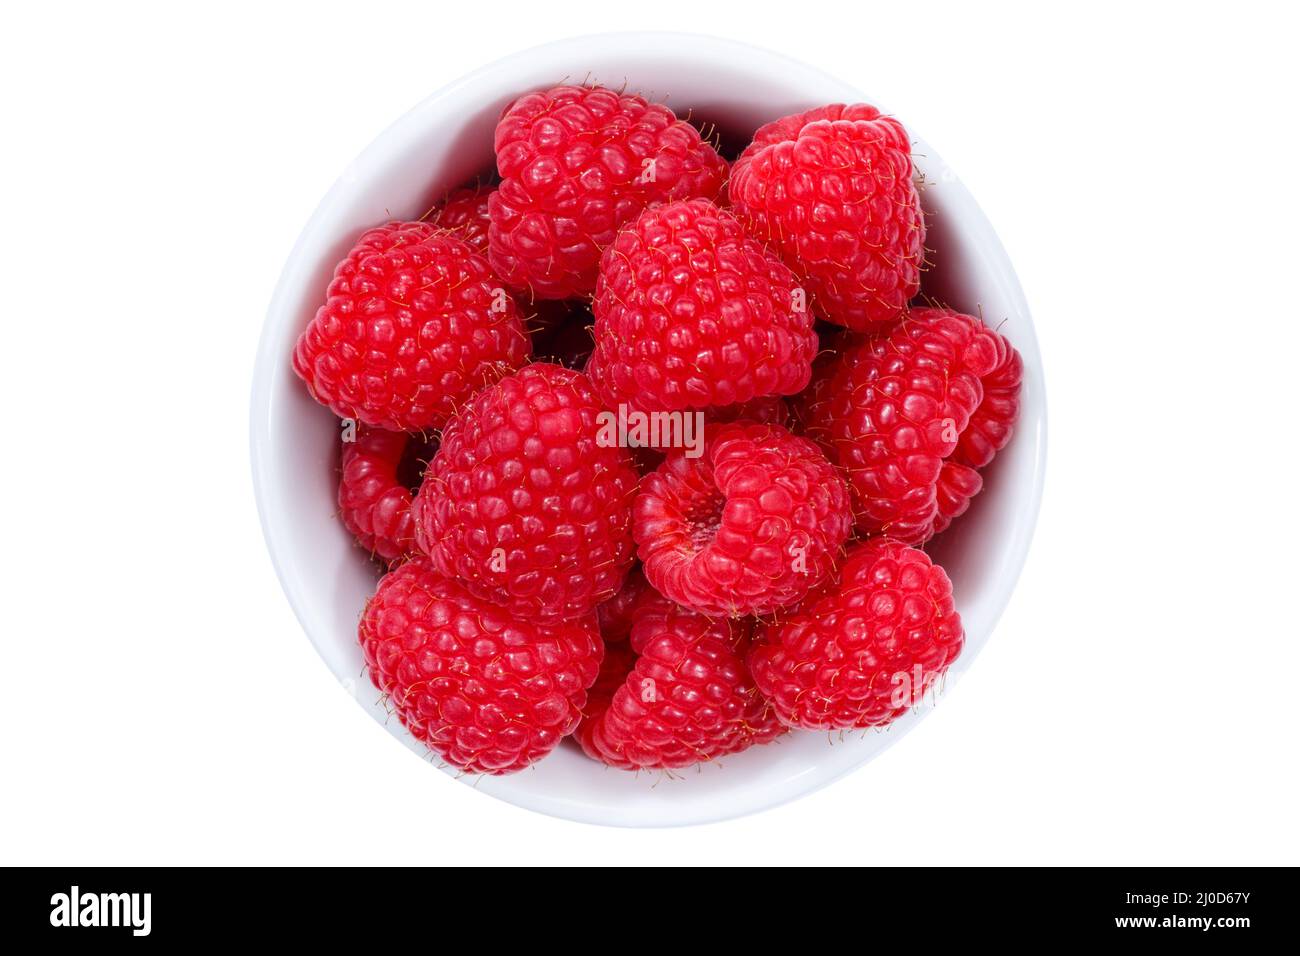 Raspberries berries from above isolated exempted exemplar Stock Photo